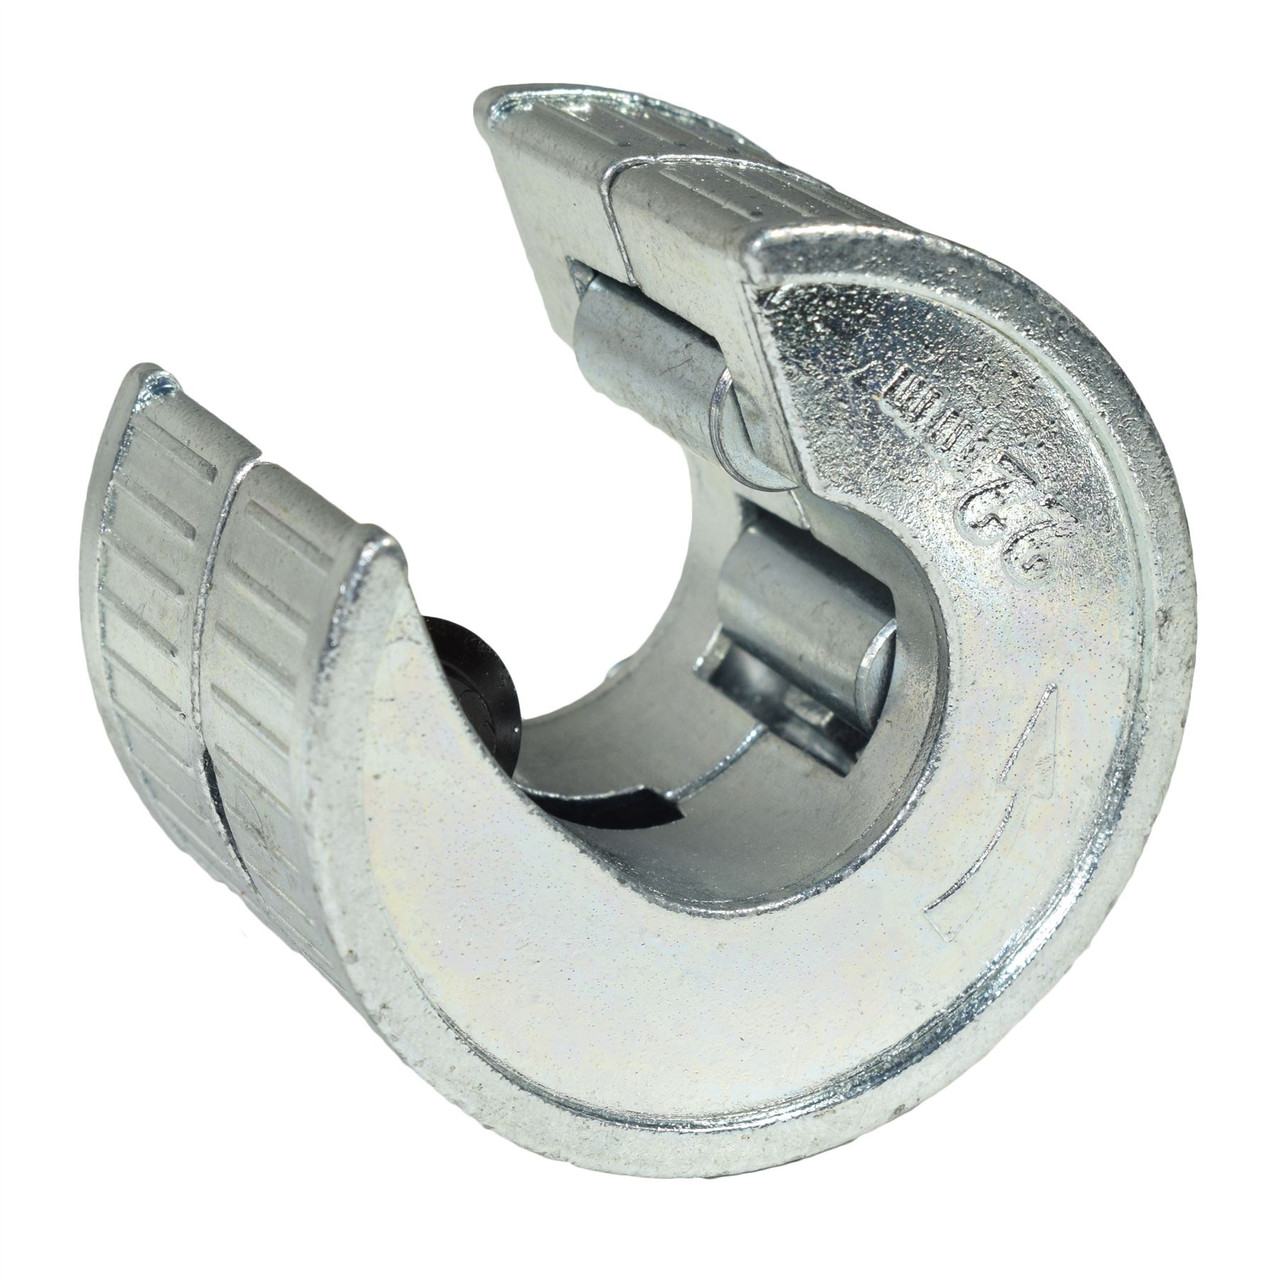 Buy Stainless steel pipe cutter online